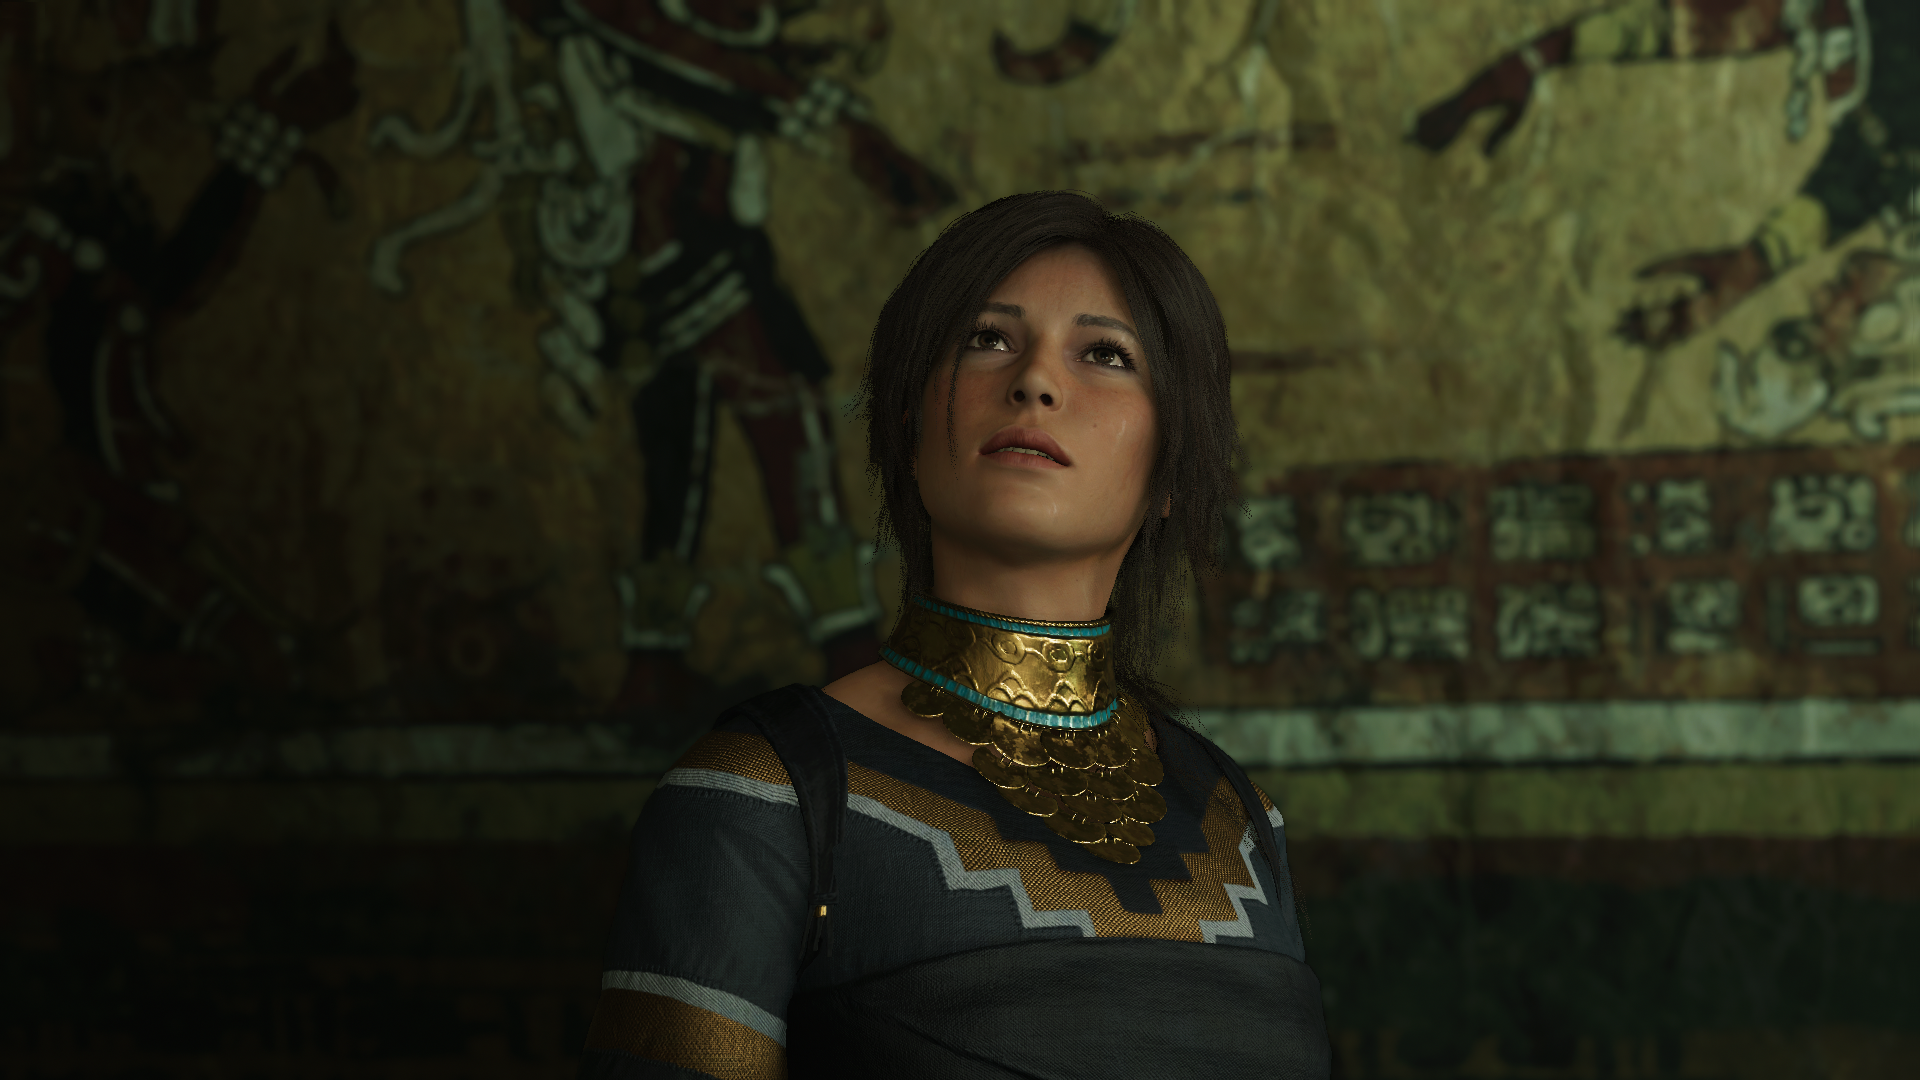 General 1920x1080 Shadow of the Tomb Raider Tomb Raider Lara Croft (Tomb Raider) screen shot looking up video game girls video game characters PC gaming video games